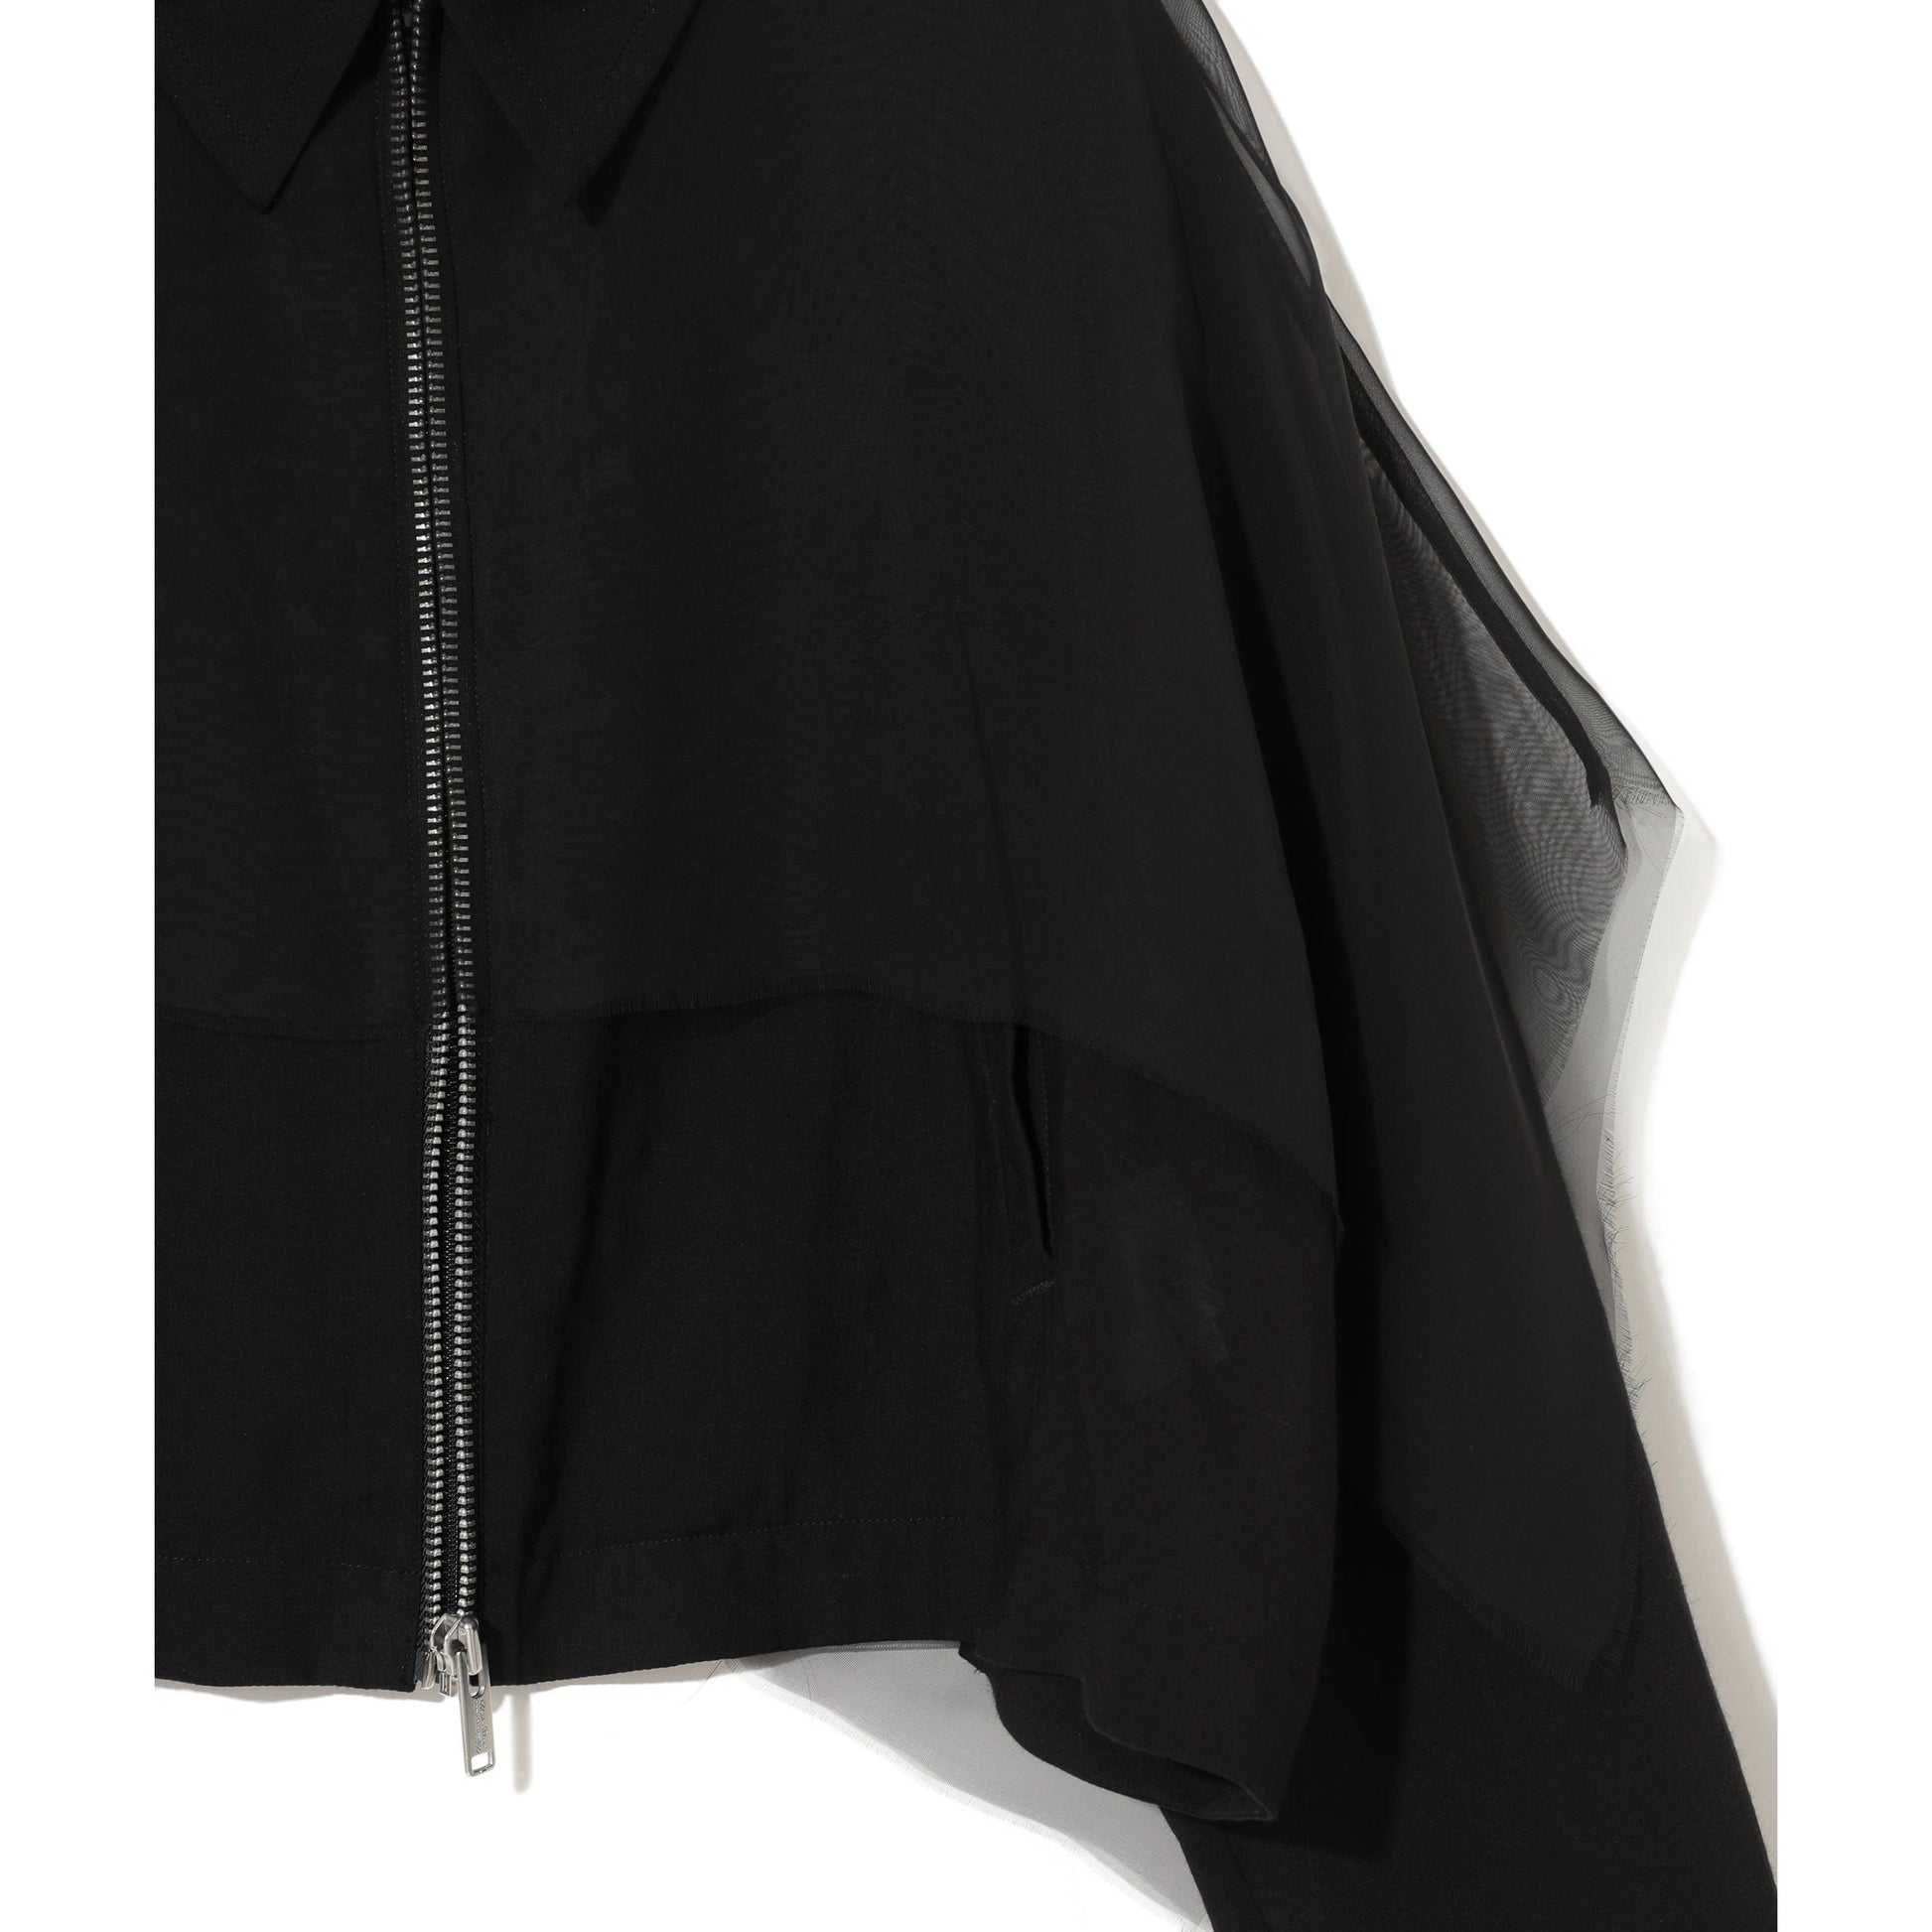 Undercover Clothing/jackets Undercover Black Blouson